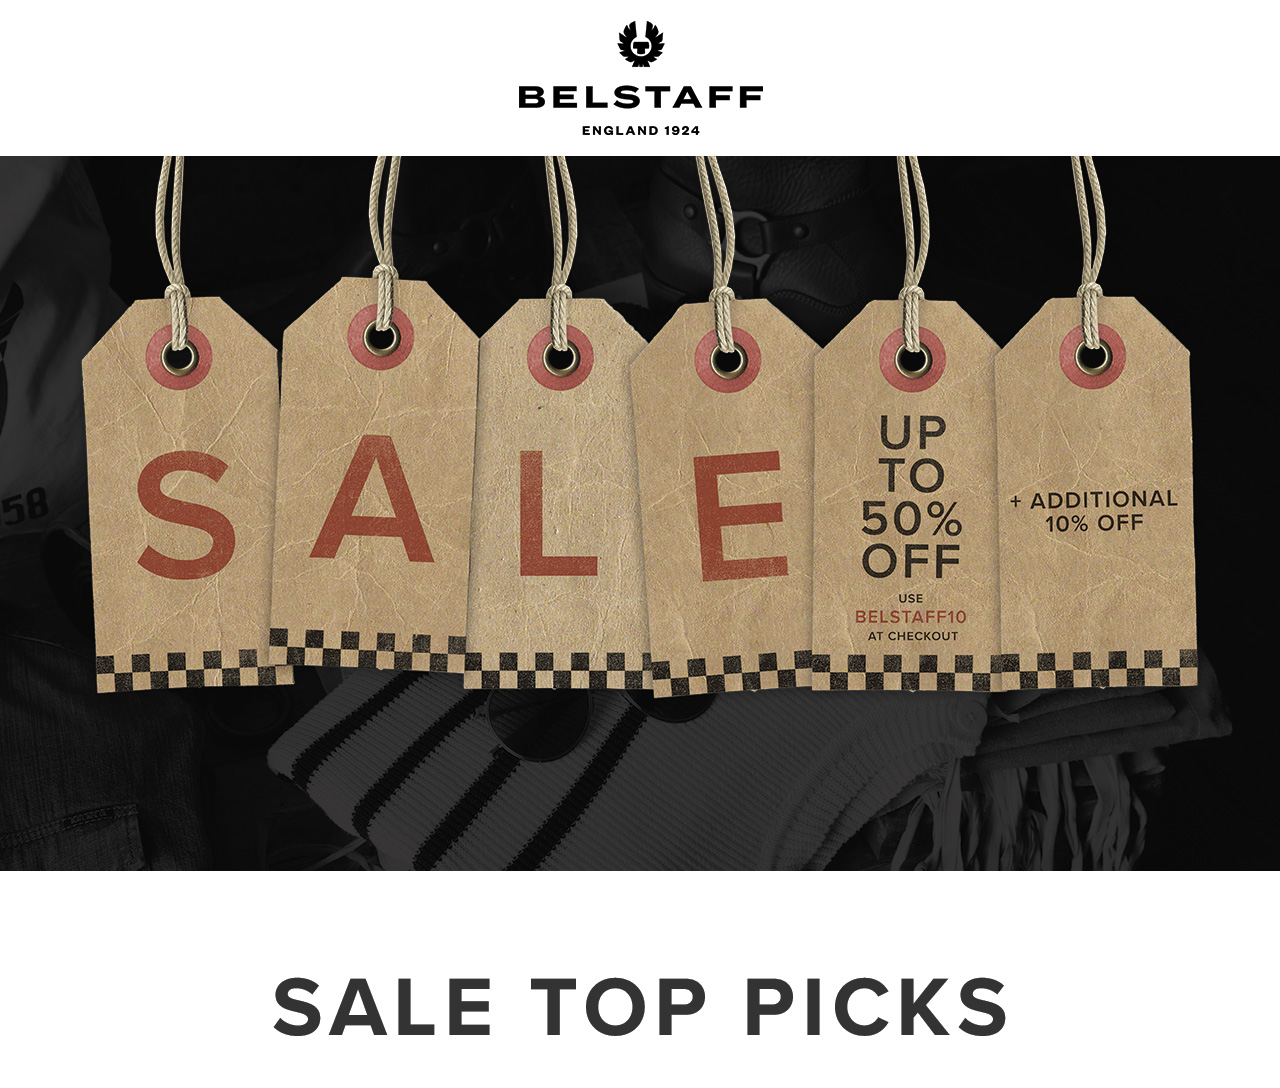 Our selection of the best picks from Sale at up to 50% off.